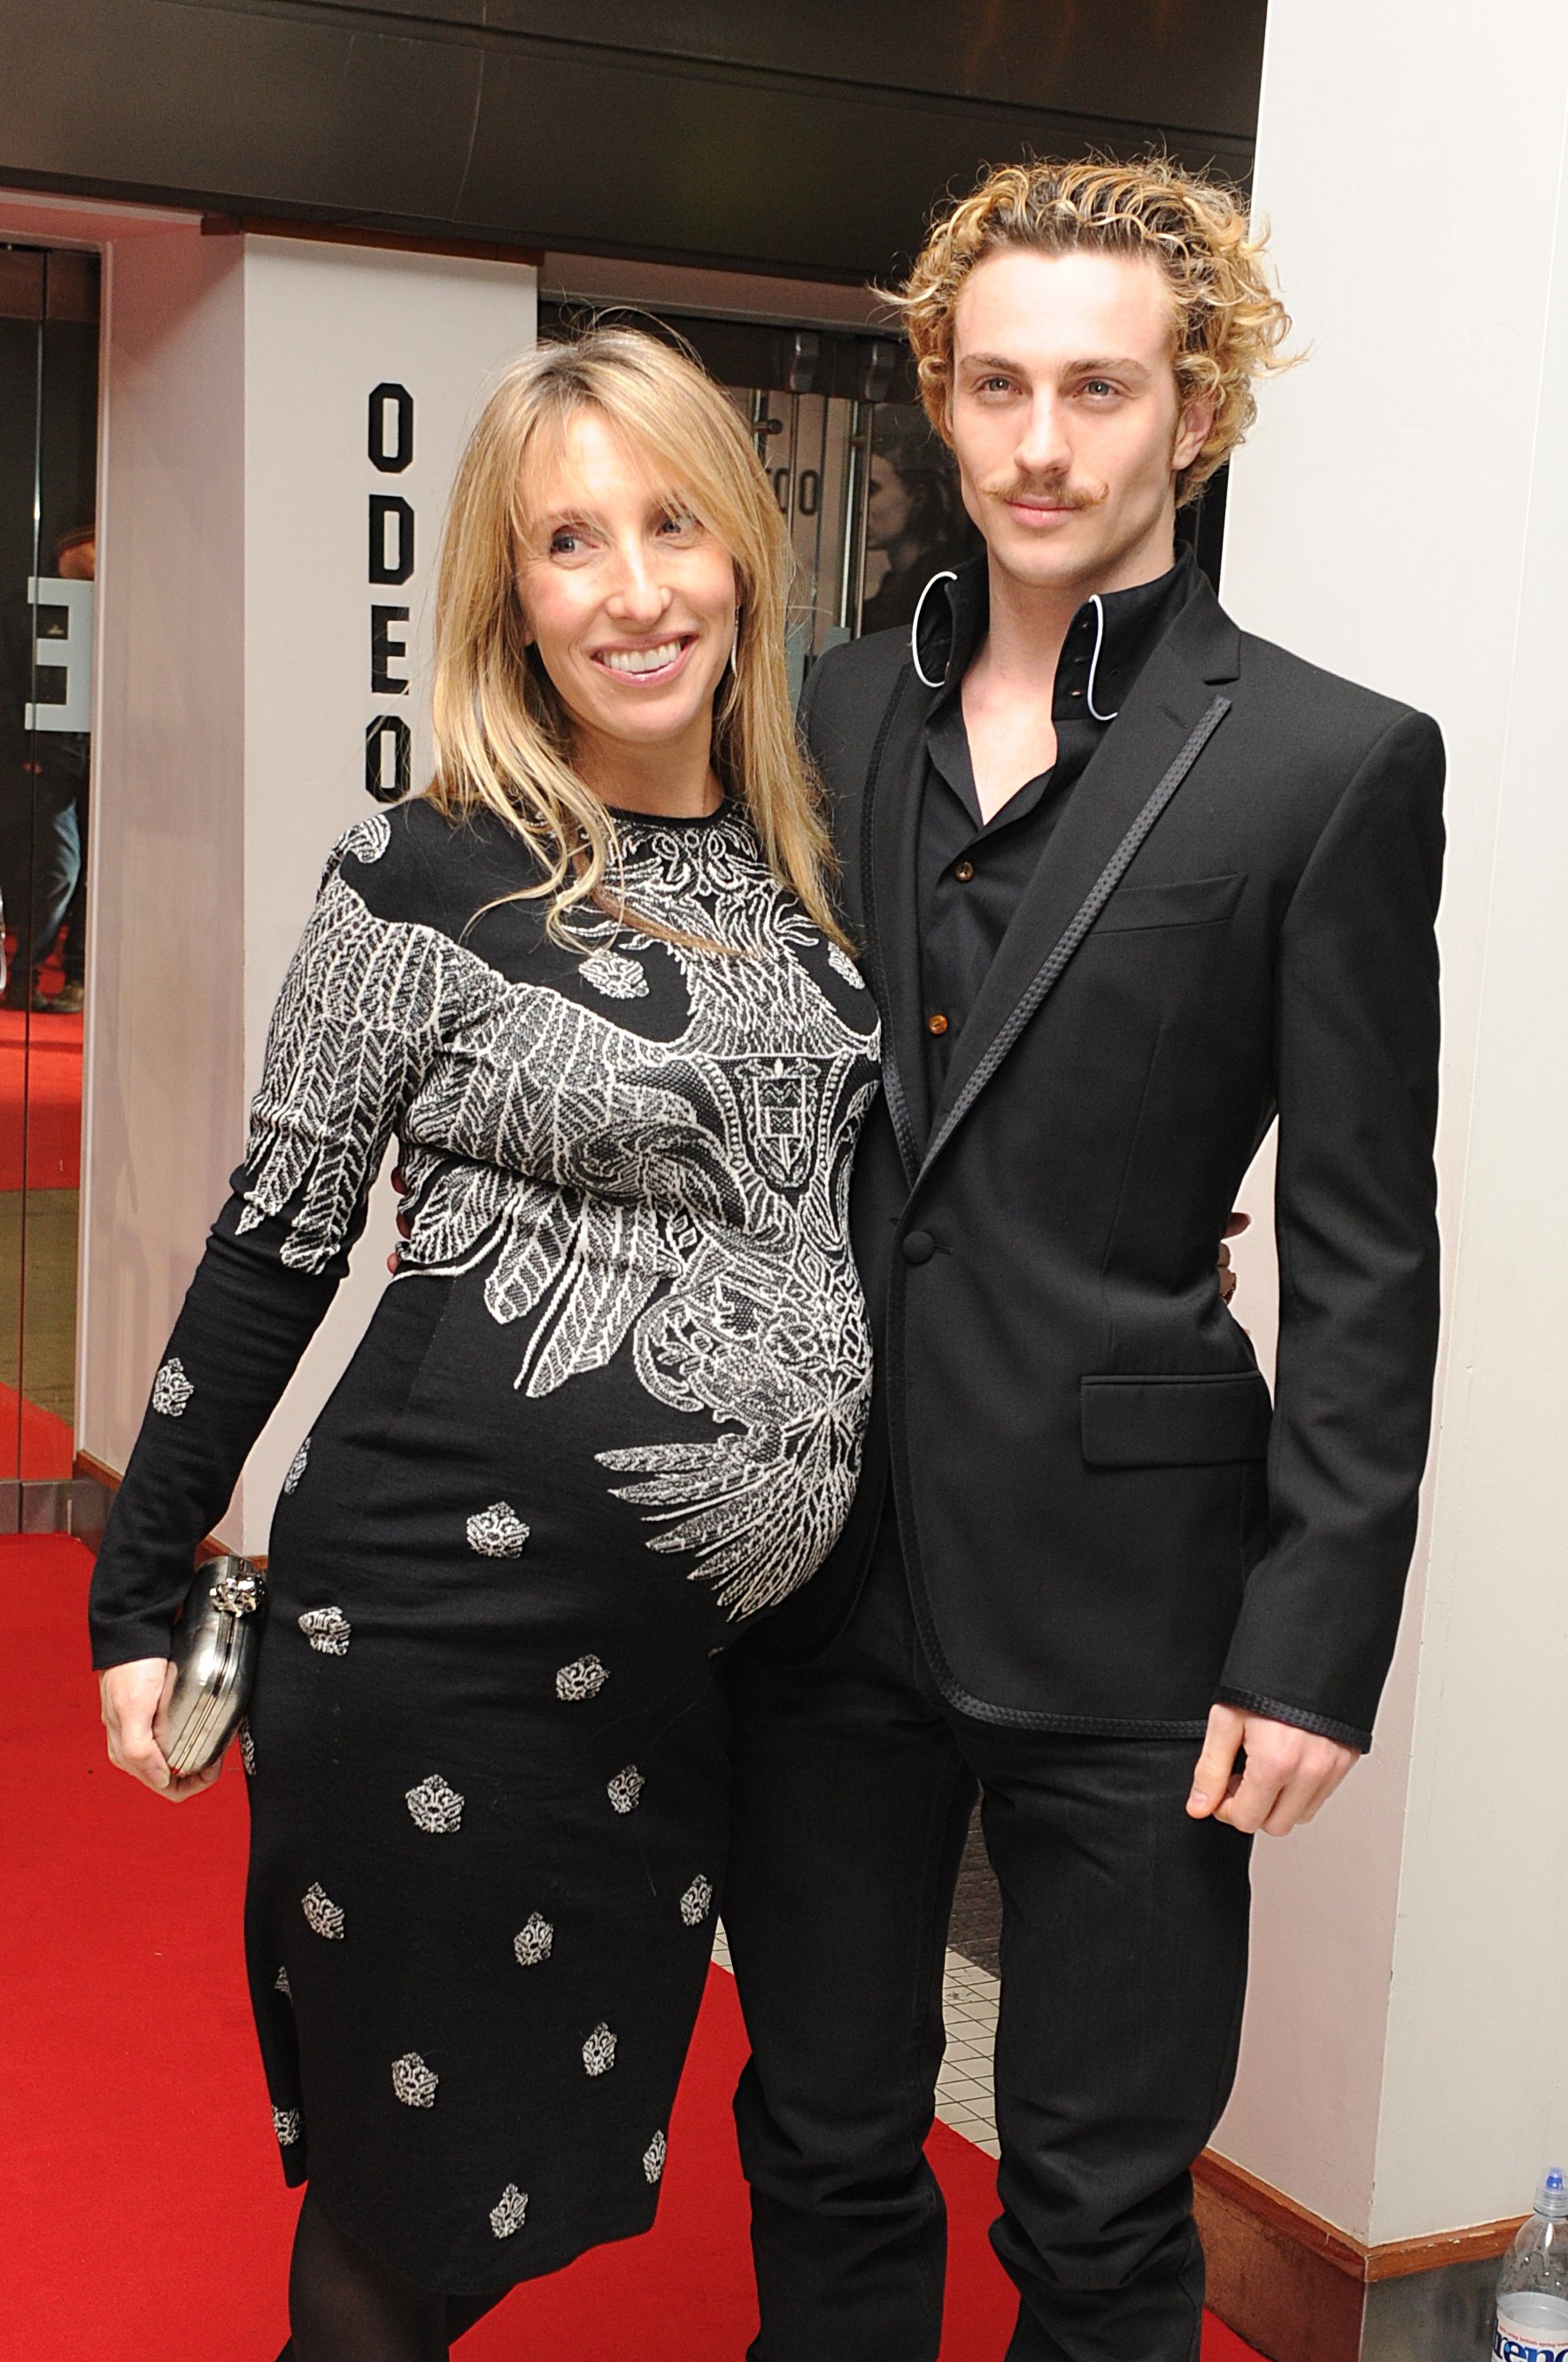 Sam and Aaron Taylor-Johnson arriving for the world premiere of "The Girl with The Dragon Tattoo" in December 2011, in London. | Source: Getty Images